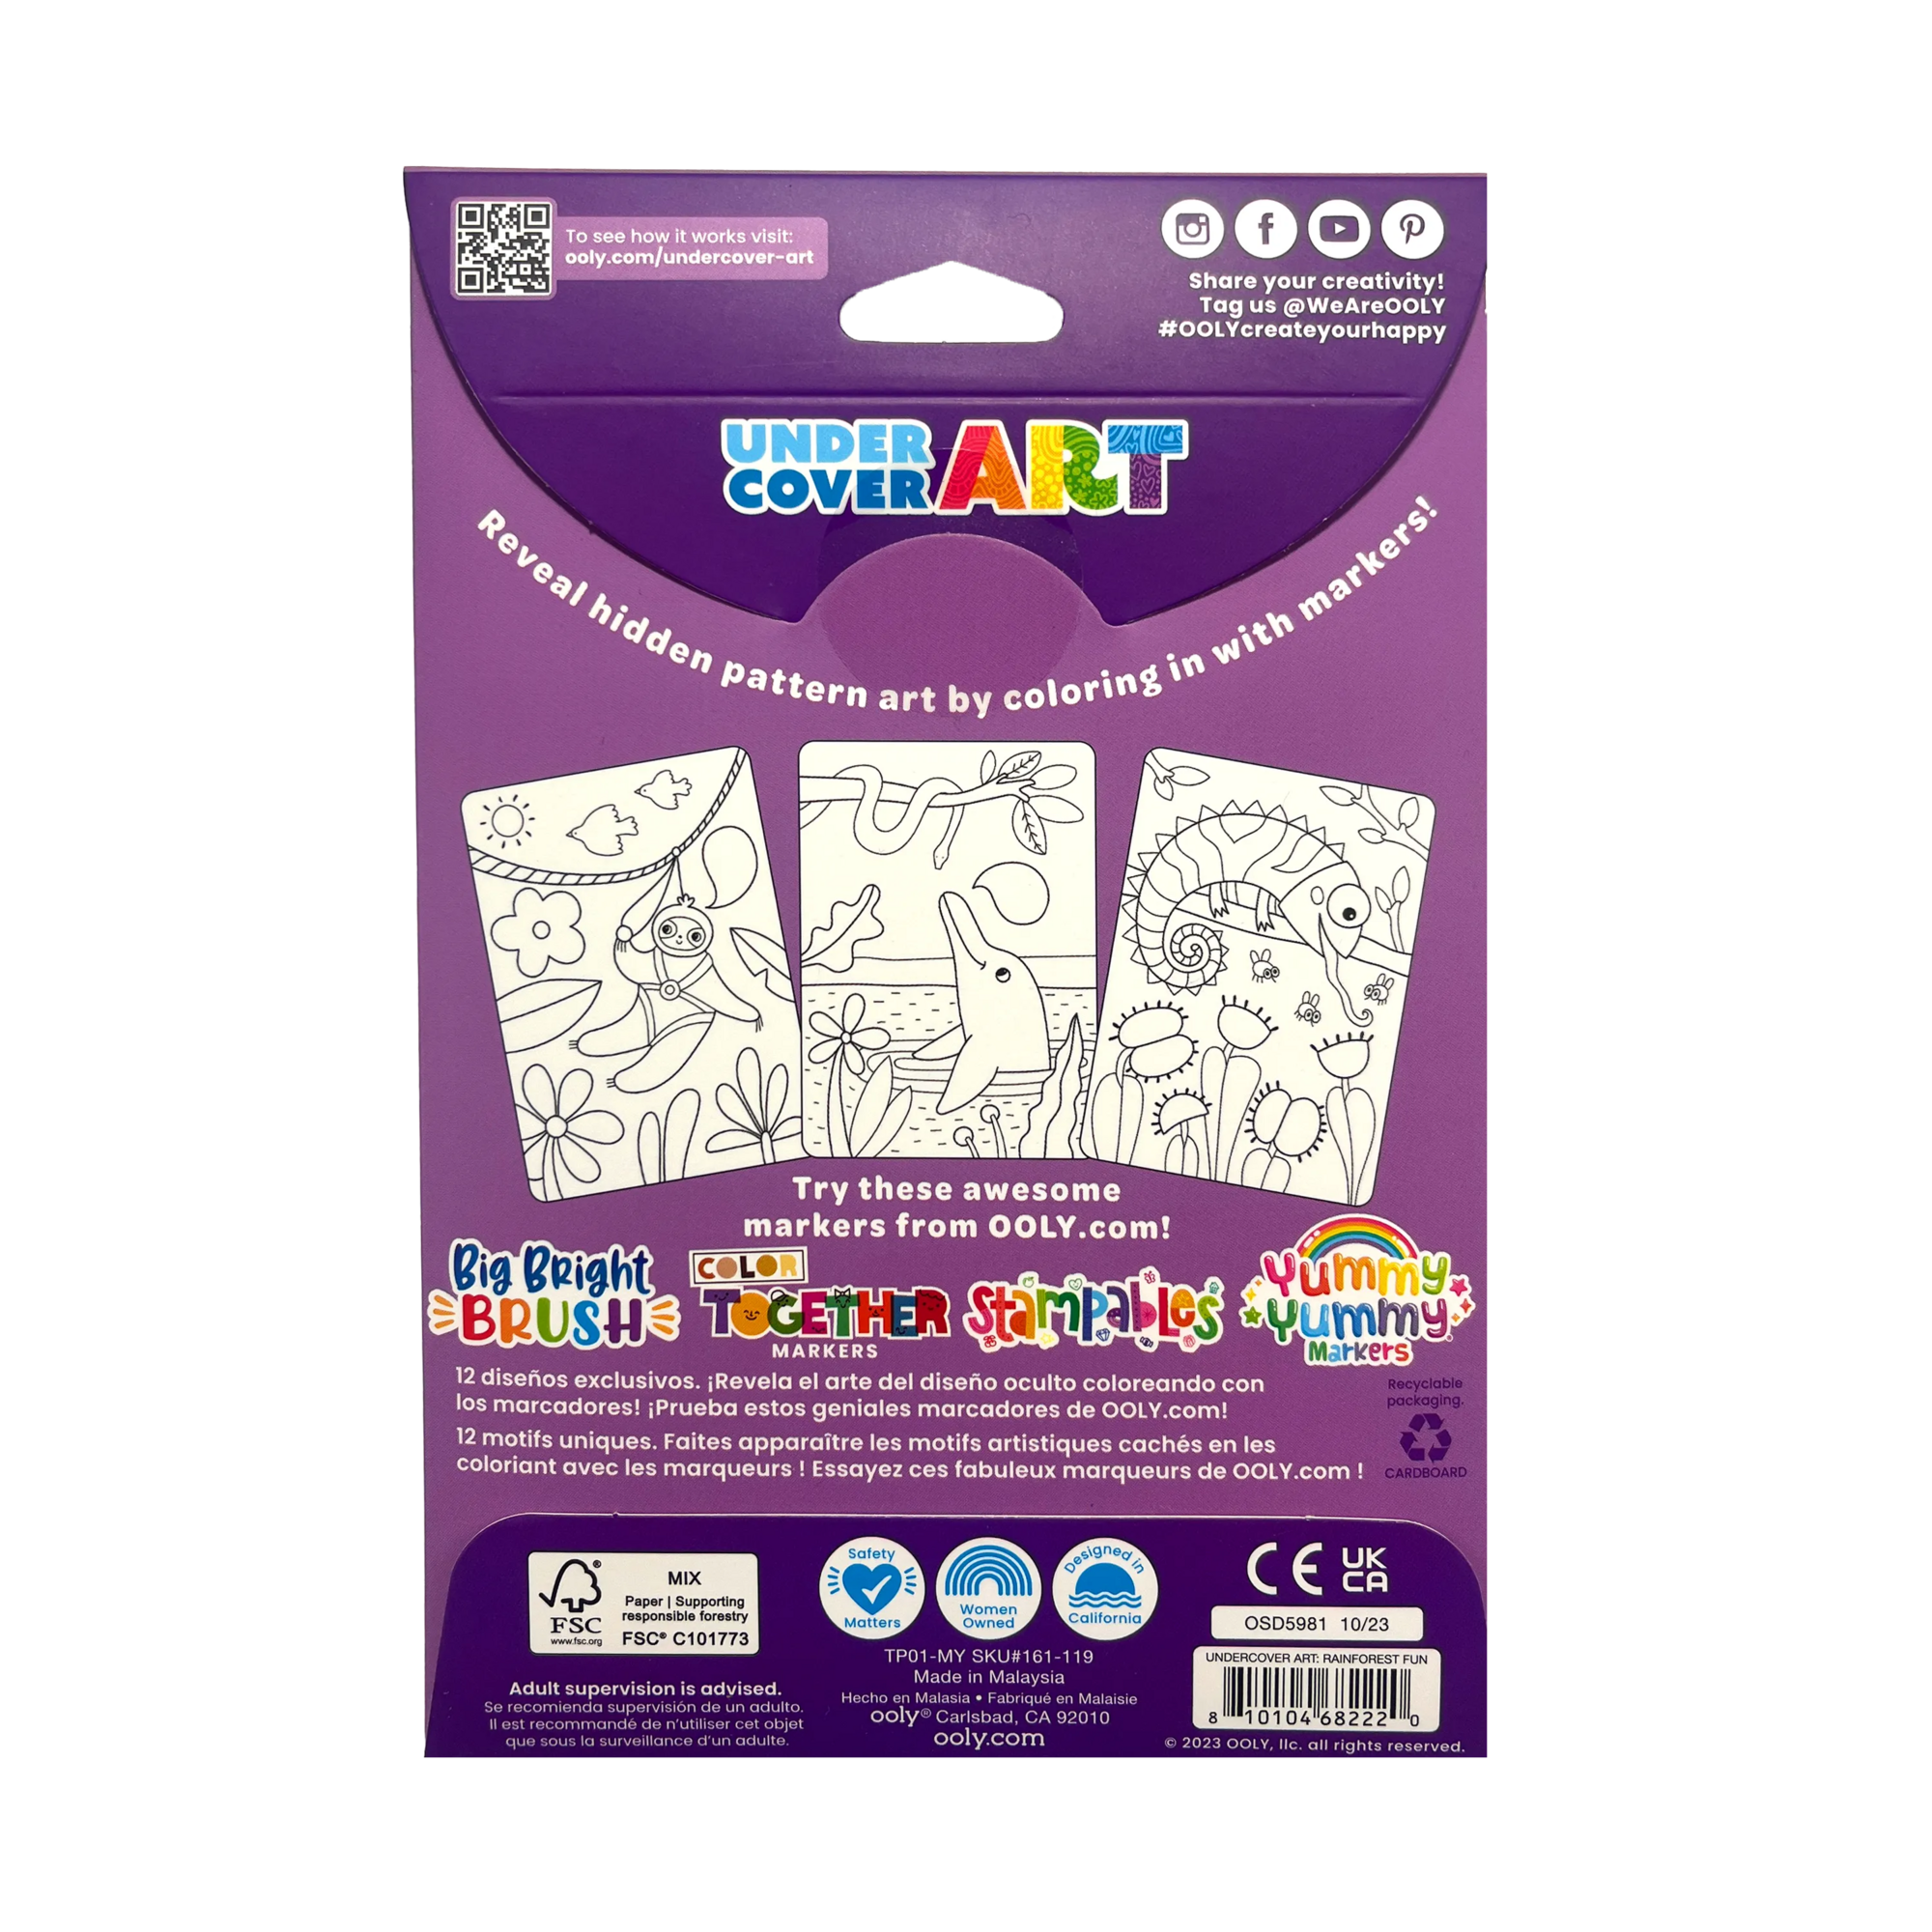 OOLY Undercover Art Hidden Pattern Coloring Activity Art Cards - Rainforest Fun back of packaging